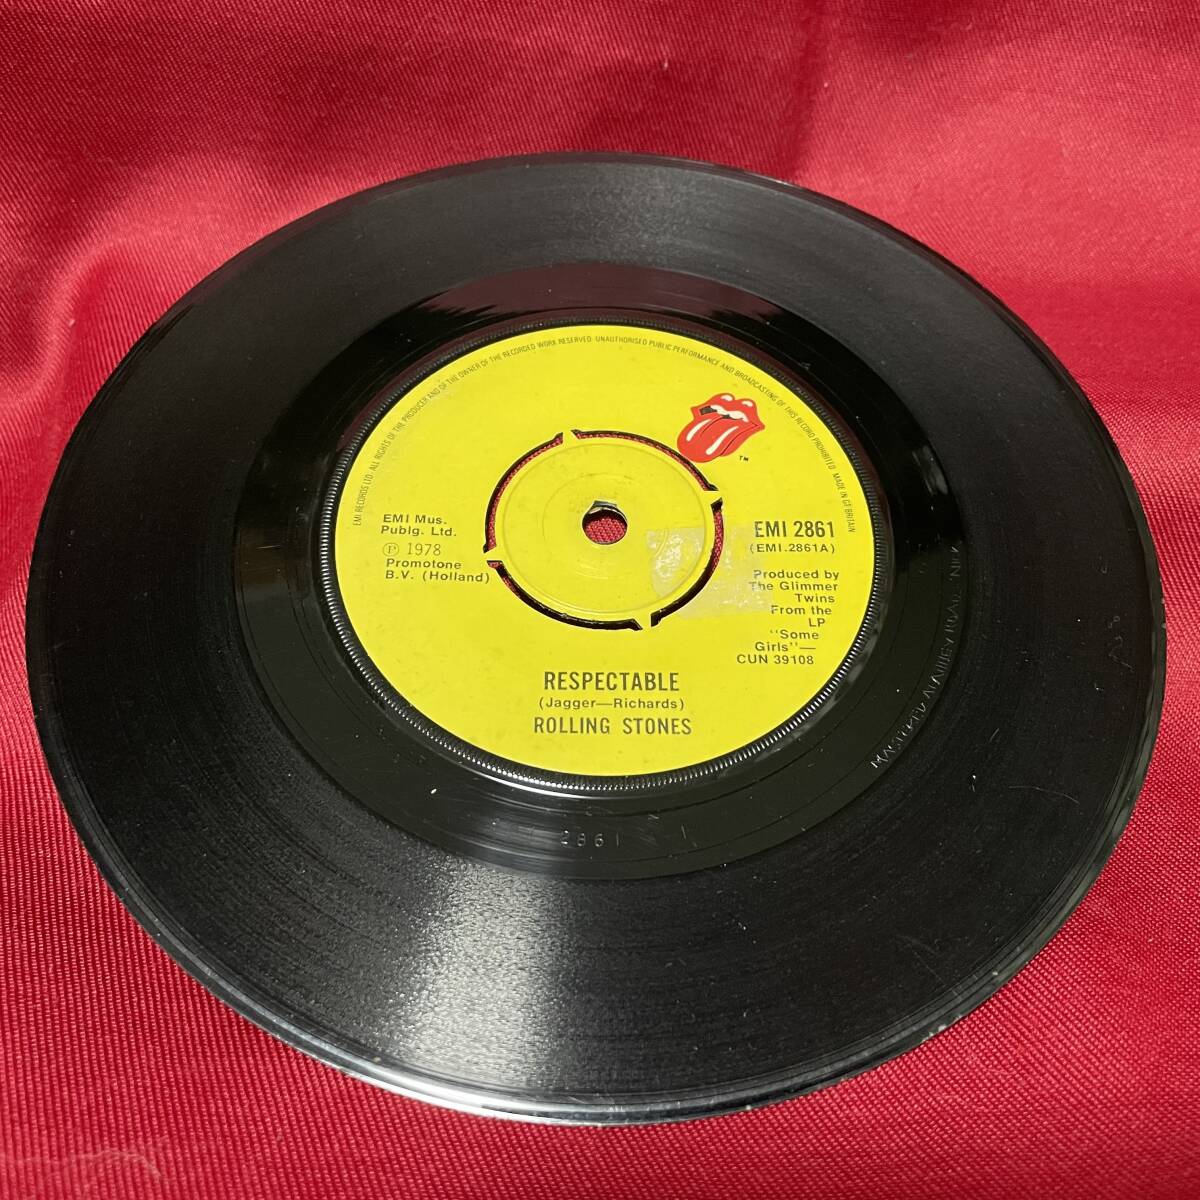 ◆UKorg7”s!◆THE ROLLING STONES◆RESPECTABLE◆の画像5